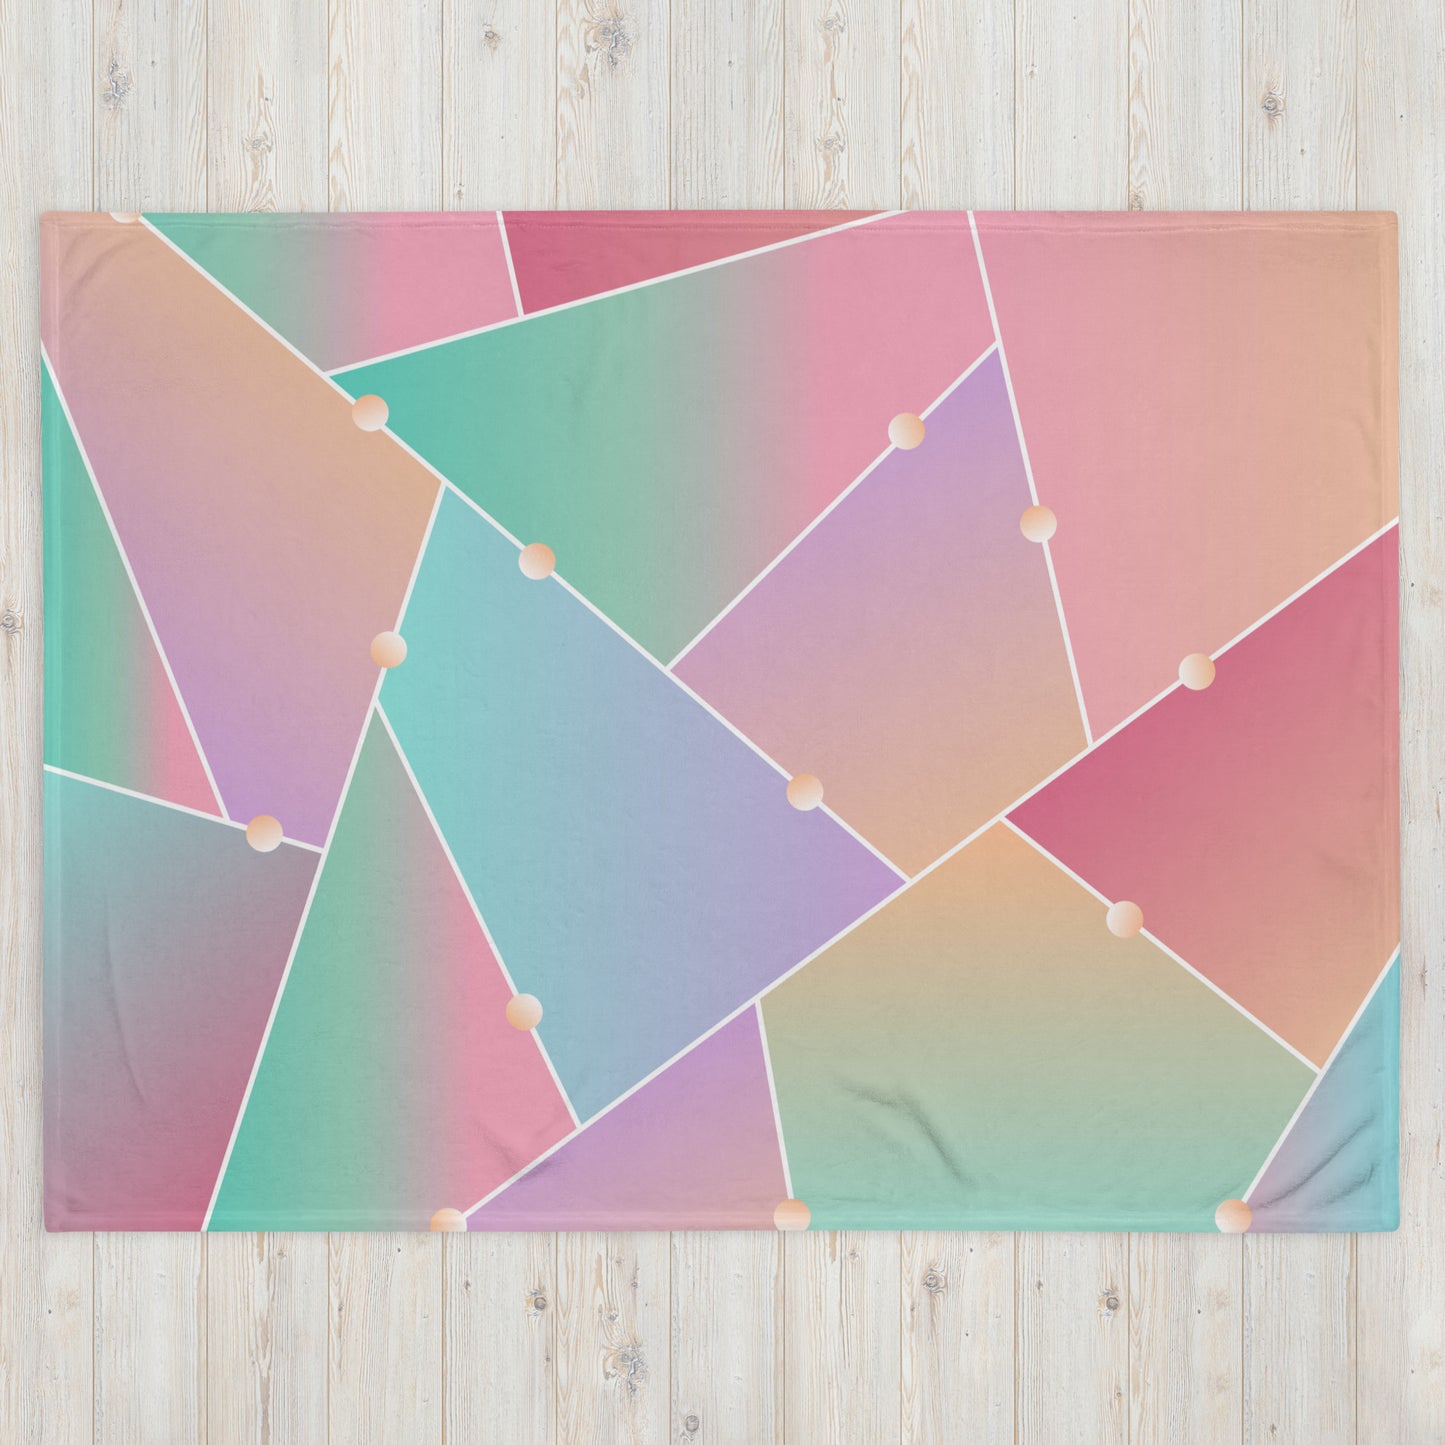 ABSTRACT GLASS- Throw Blanket